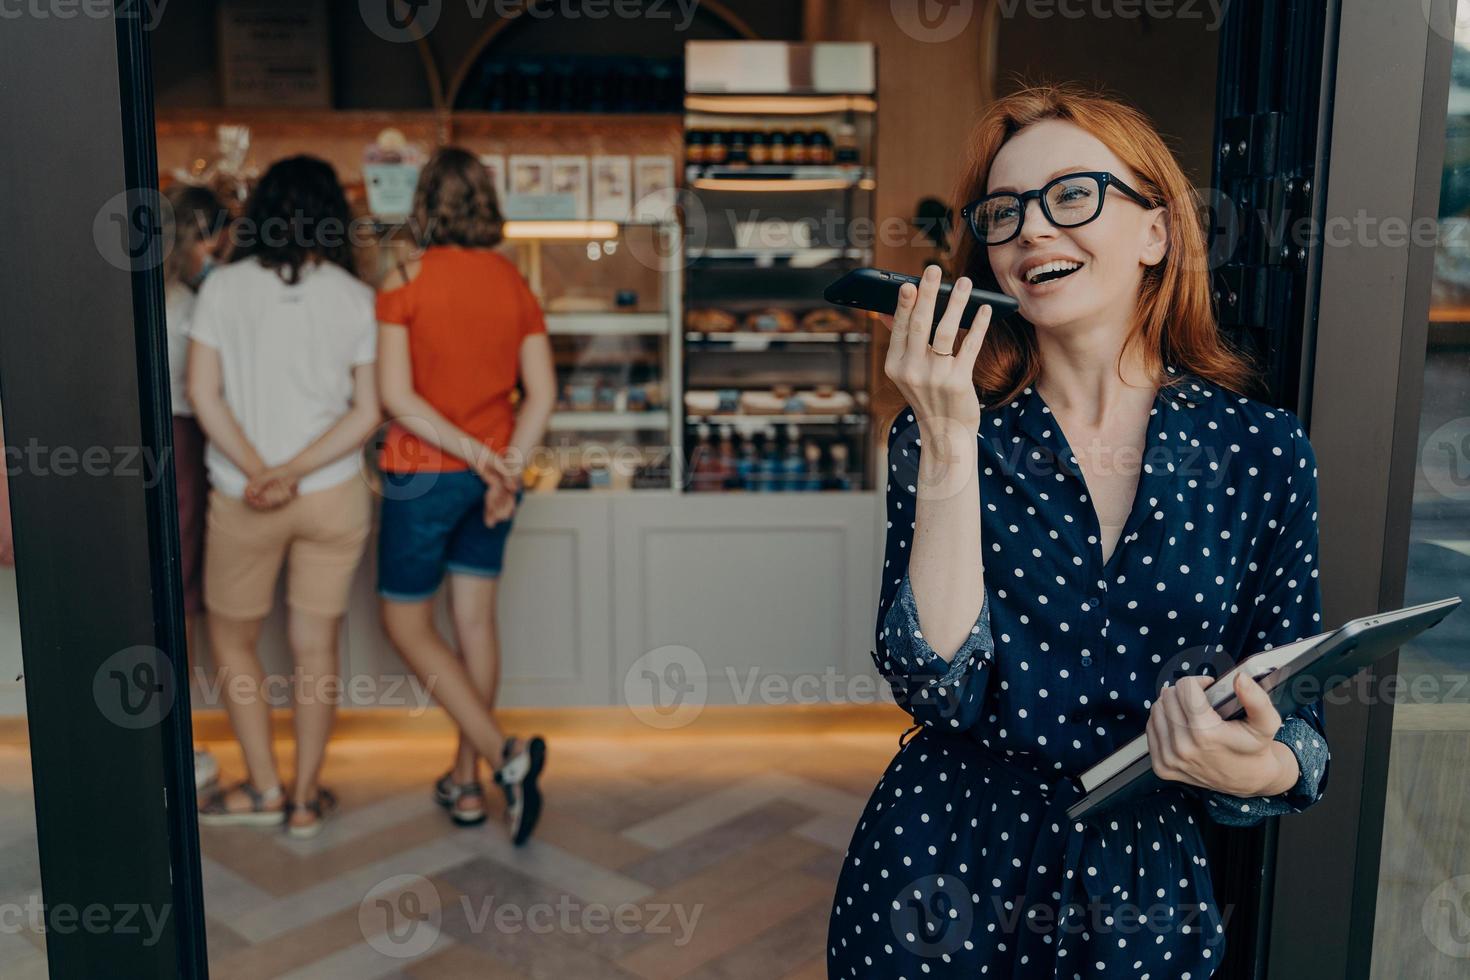 Redhead young woman makes voice call keeps smartphone near mouth wears spectacles polka dot dress photo